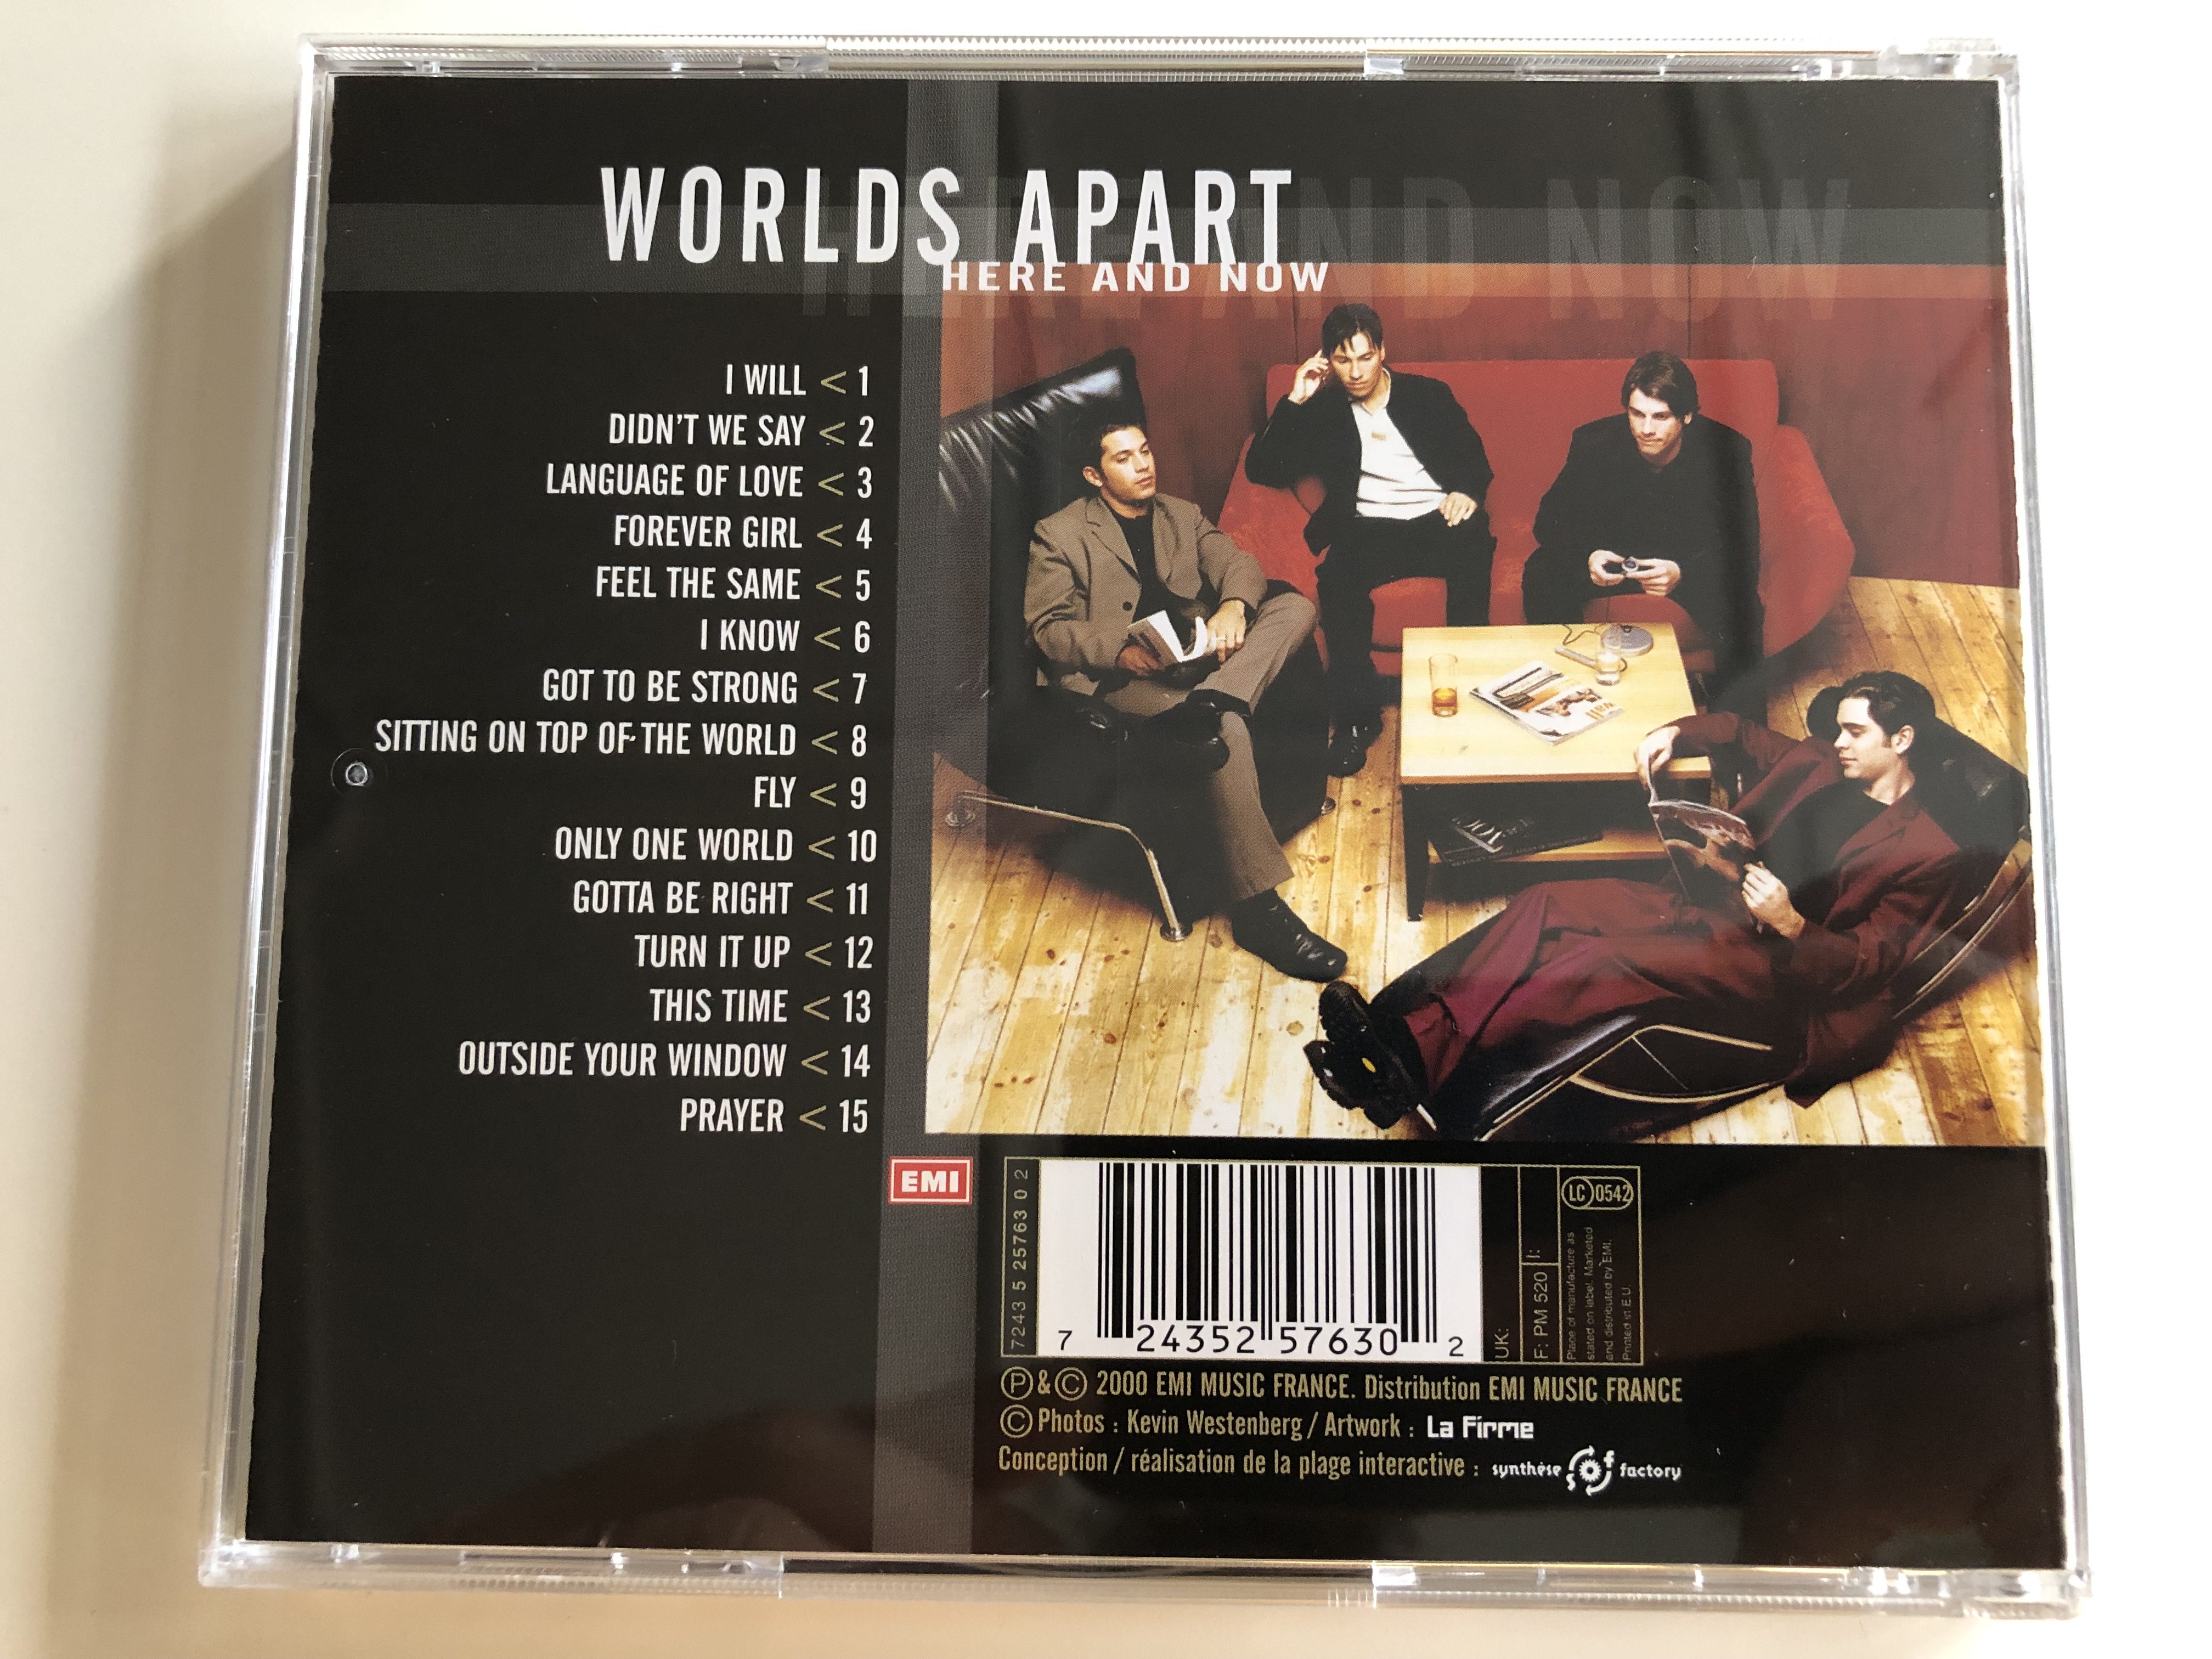 worlds-apart-here-and-now-i-will-language-of-love-i-know-fly-this-time-audio-cd-2000-emi-7-.jpg